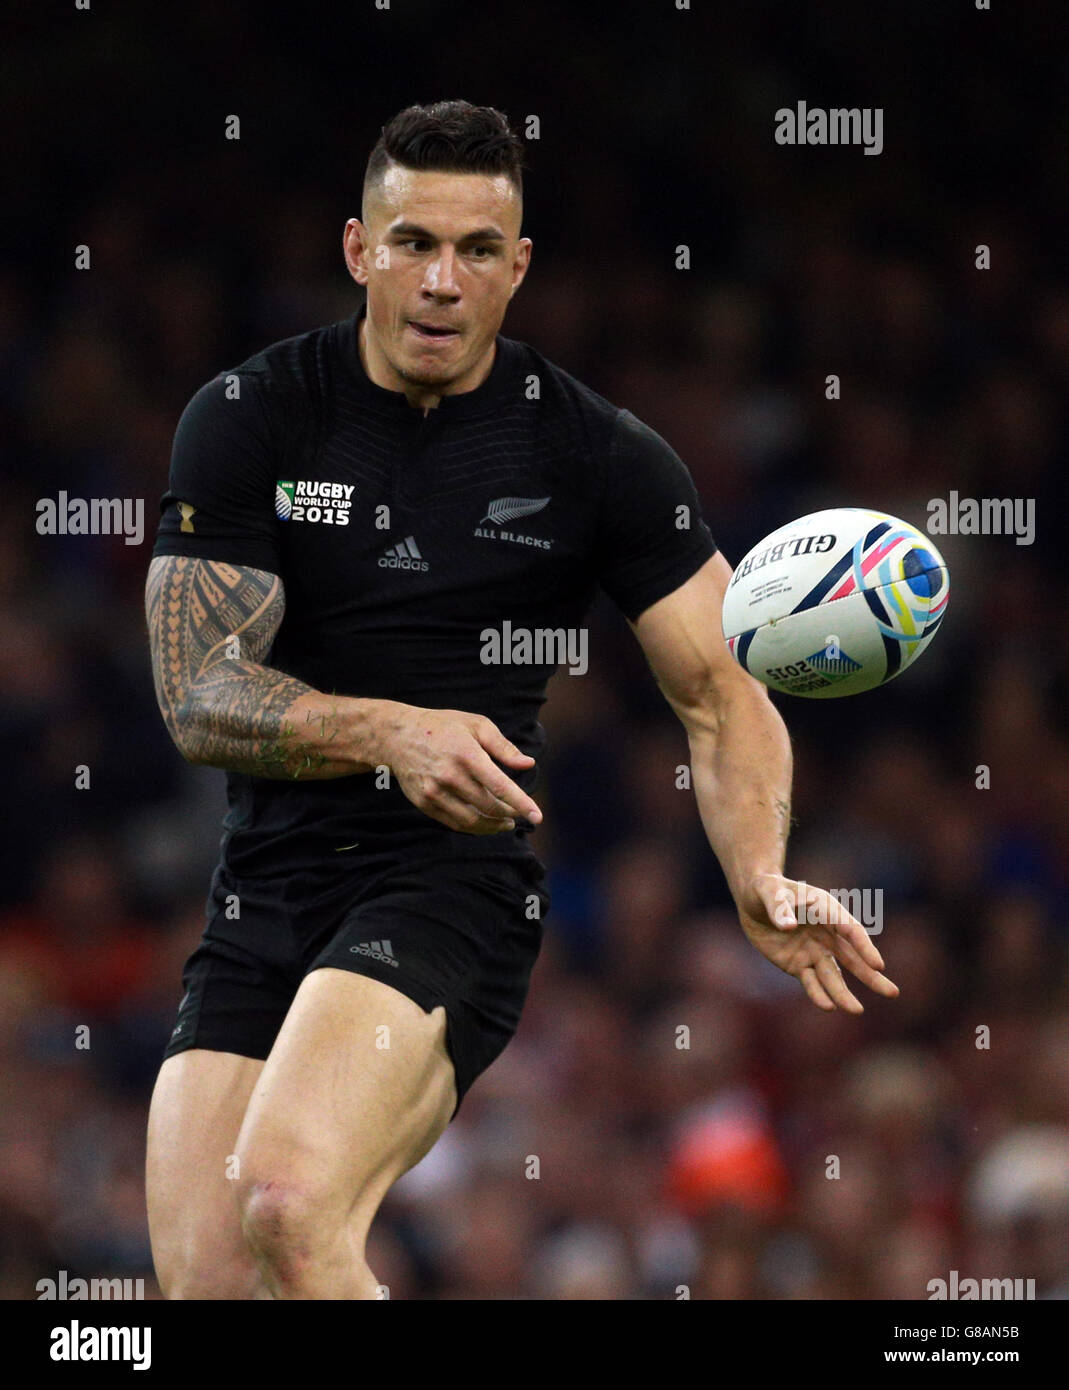 New Zealand's Sonny Bill Williams during the Rugby World Cup match at the Millennium Stadium, Cardiff. PRESS ASSOCIATION Photo. Picture date: Friday October 2, 2015. See PA story RUGBYU New Zealand. Photo credit should read: David Davies/PA Wire. Stock Photo